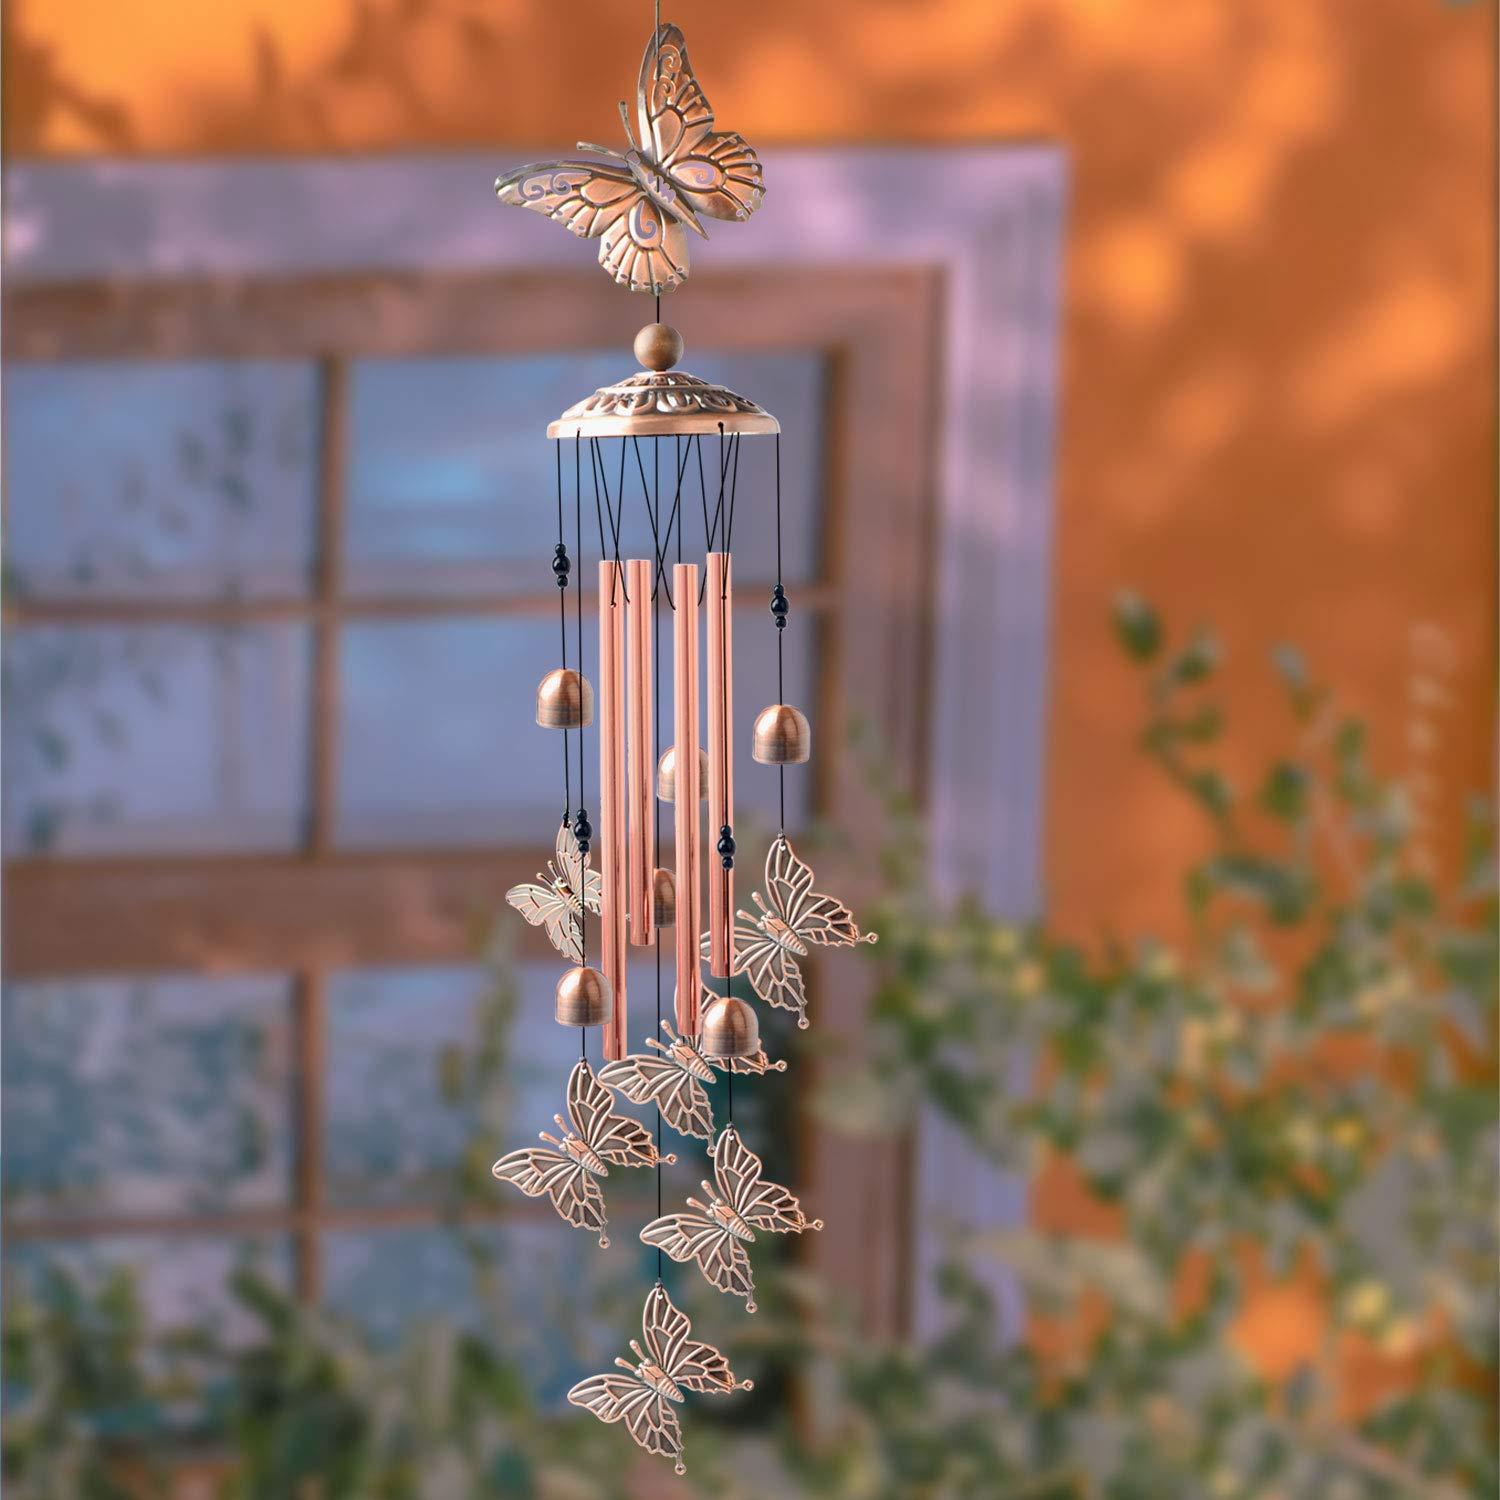 Handmade Iron Wind Chime For Home Decoration